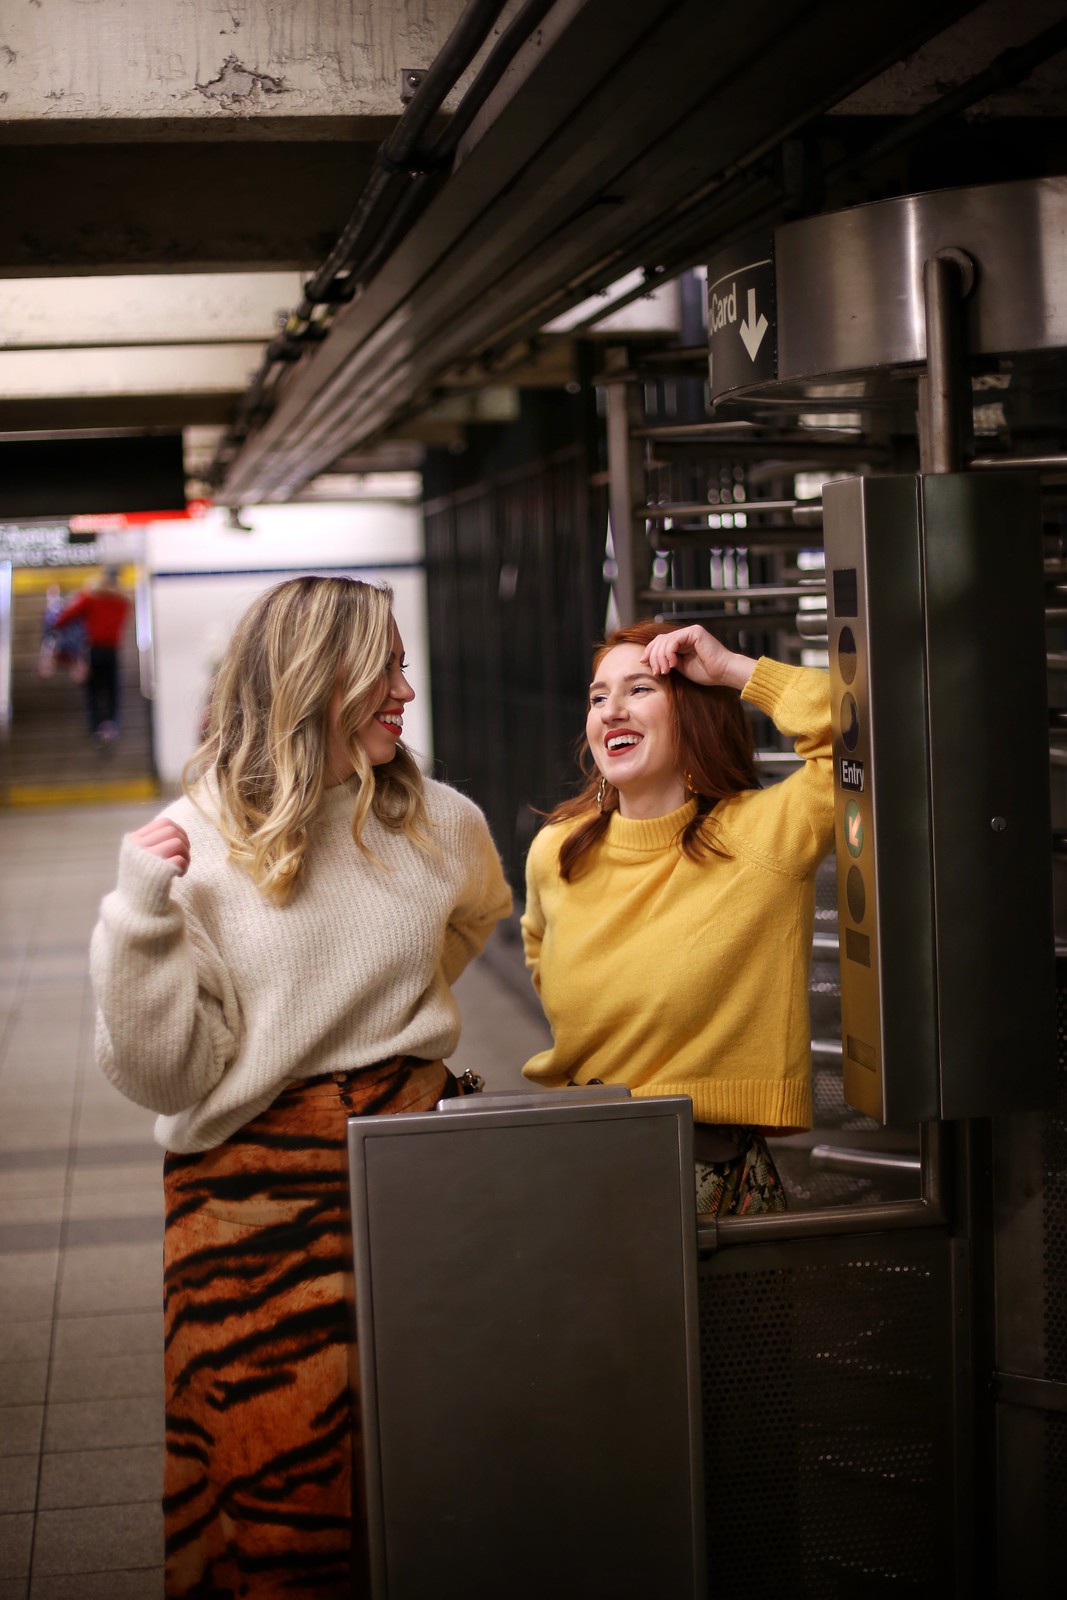 Yellow Sweater White Reformation Sweater Fashion Bloggers Winter Outfits Canal Street Subway Fashion Photo Shoot